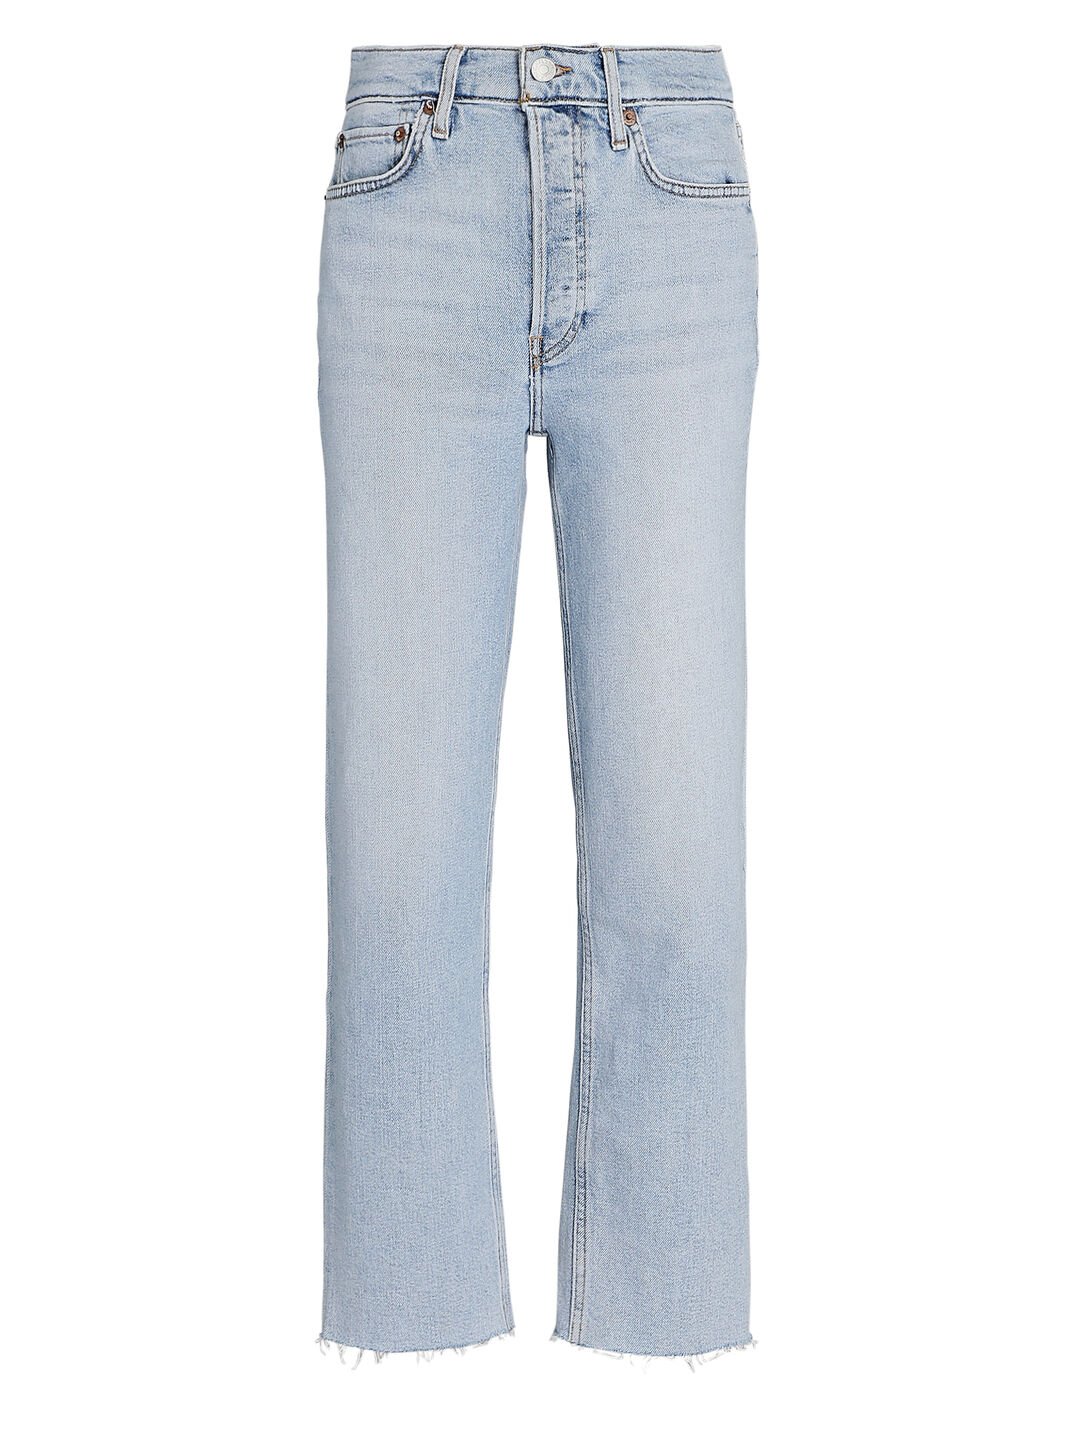 70s High-Rise Stove Pipe Jeans